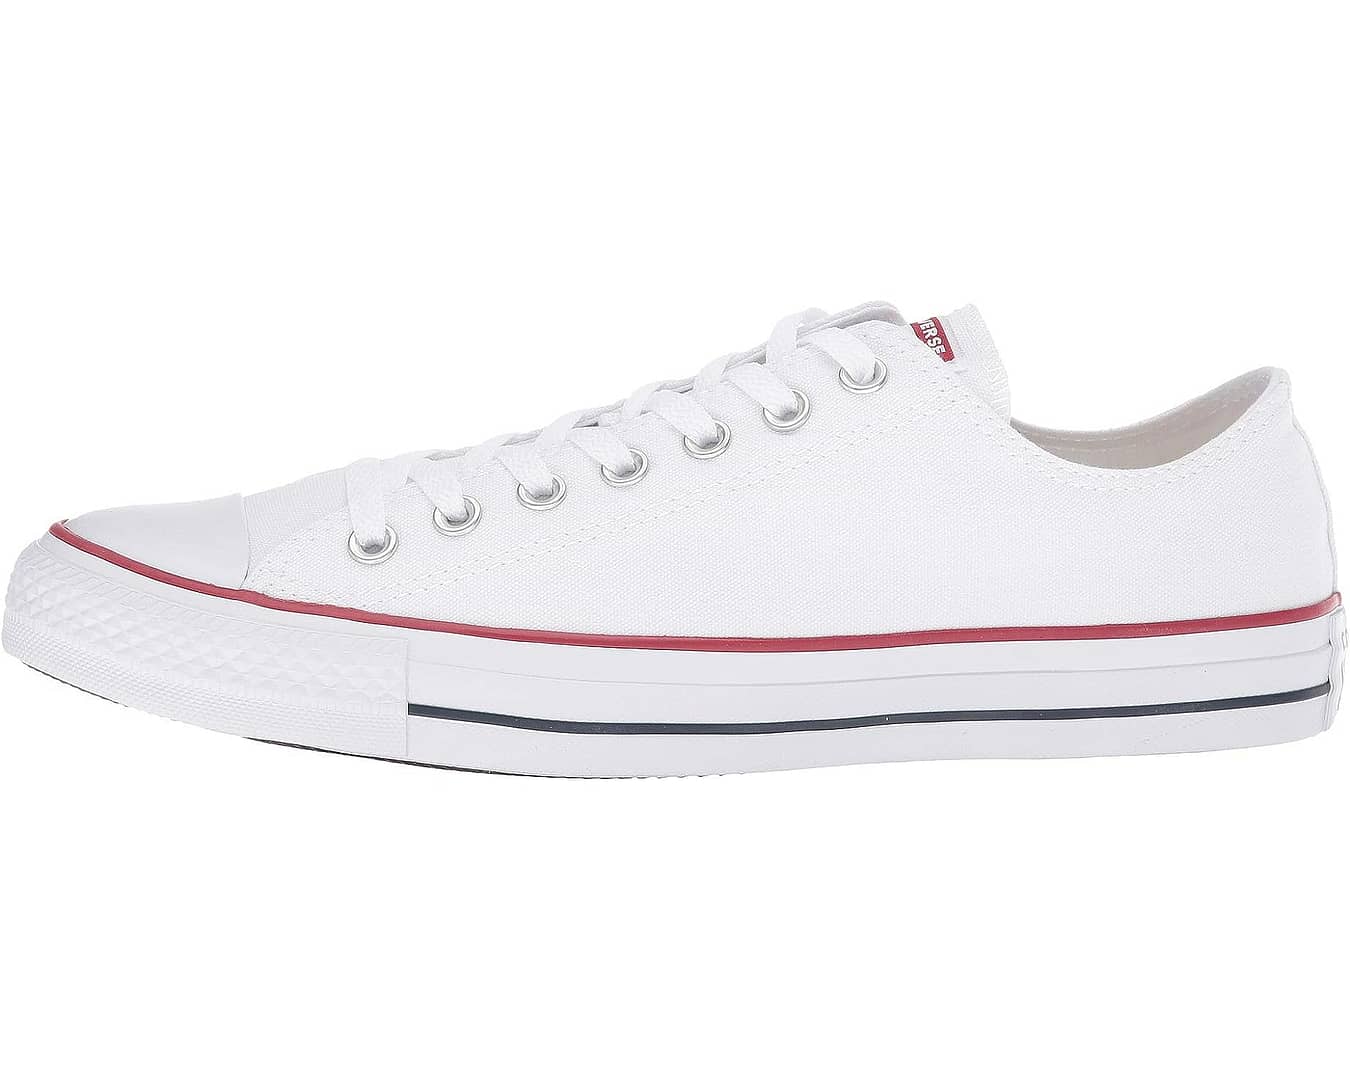 Converse Men's Chuck Taylor All Star Sneakers - The Perfect Shoe for Everyday Wear